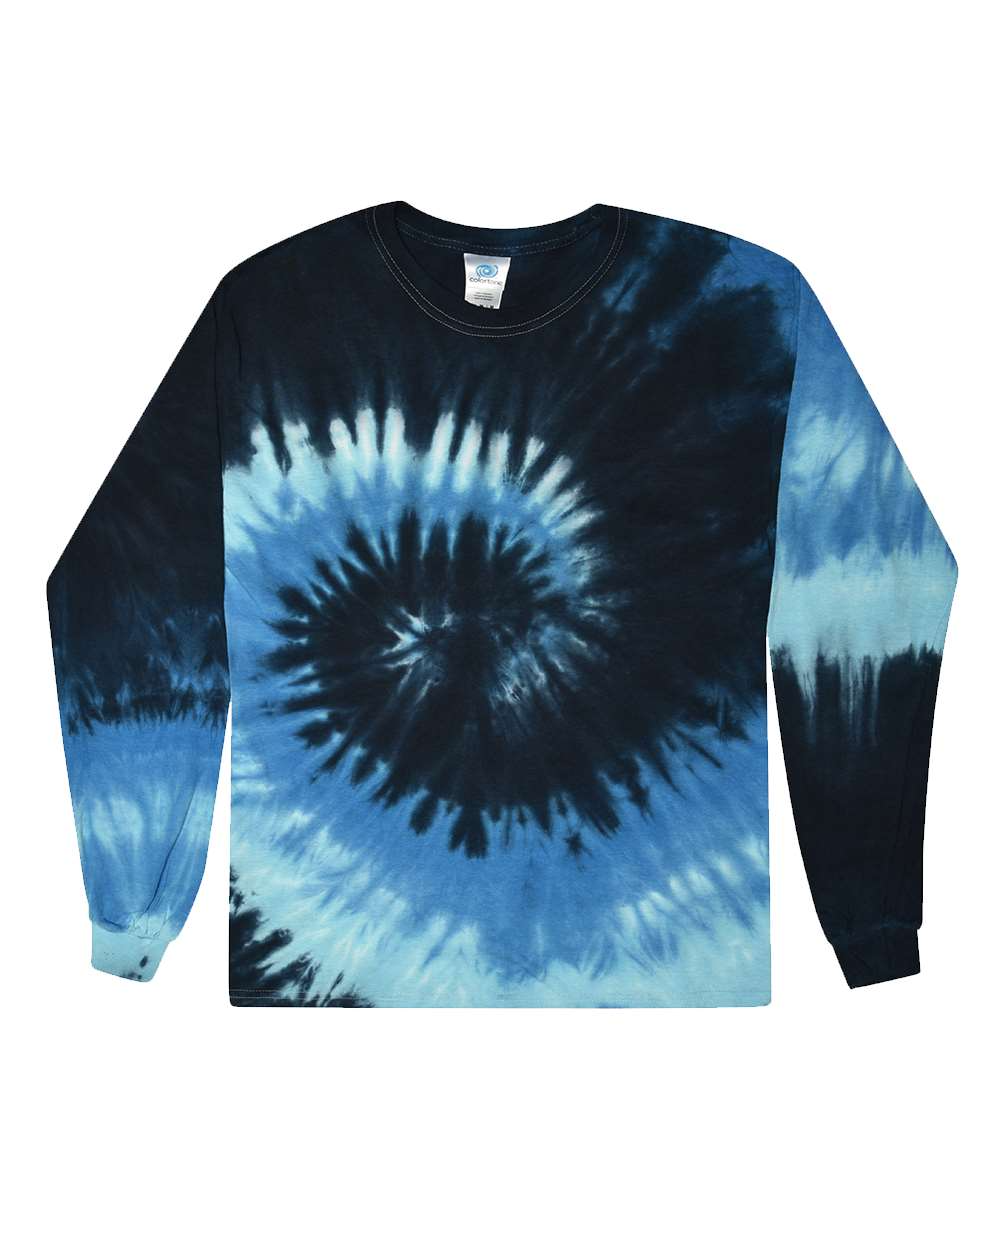 Youth Tie-dyed Long-sleeved T-shirt